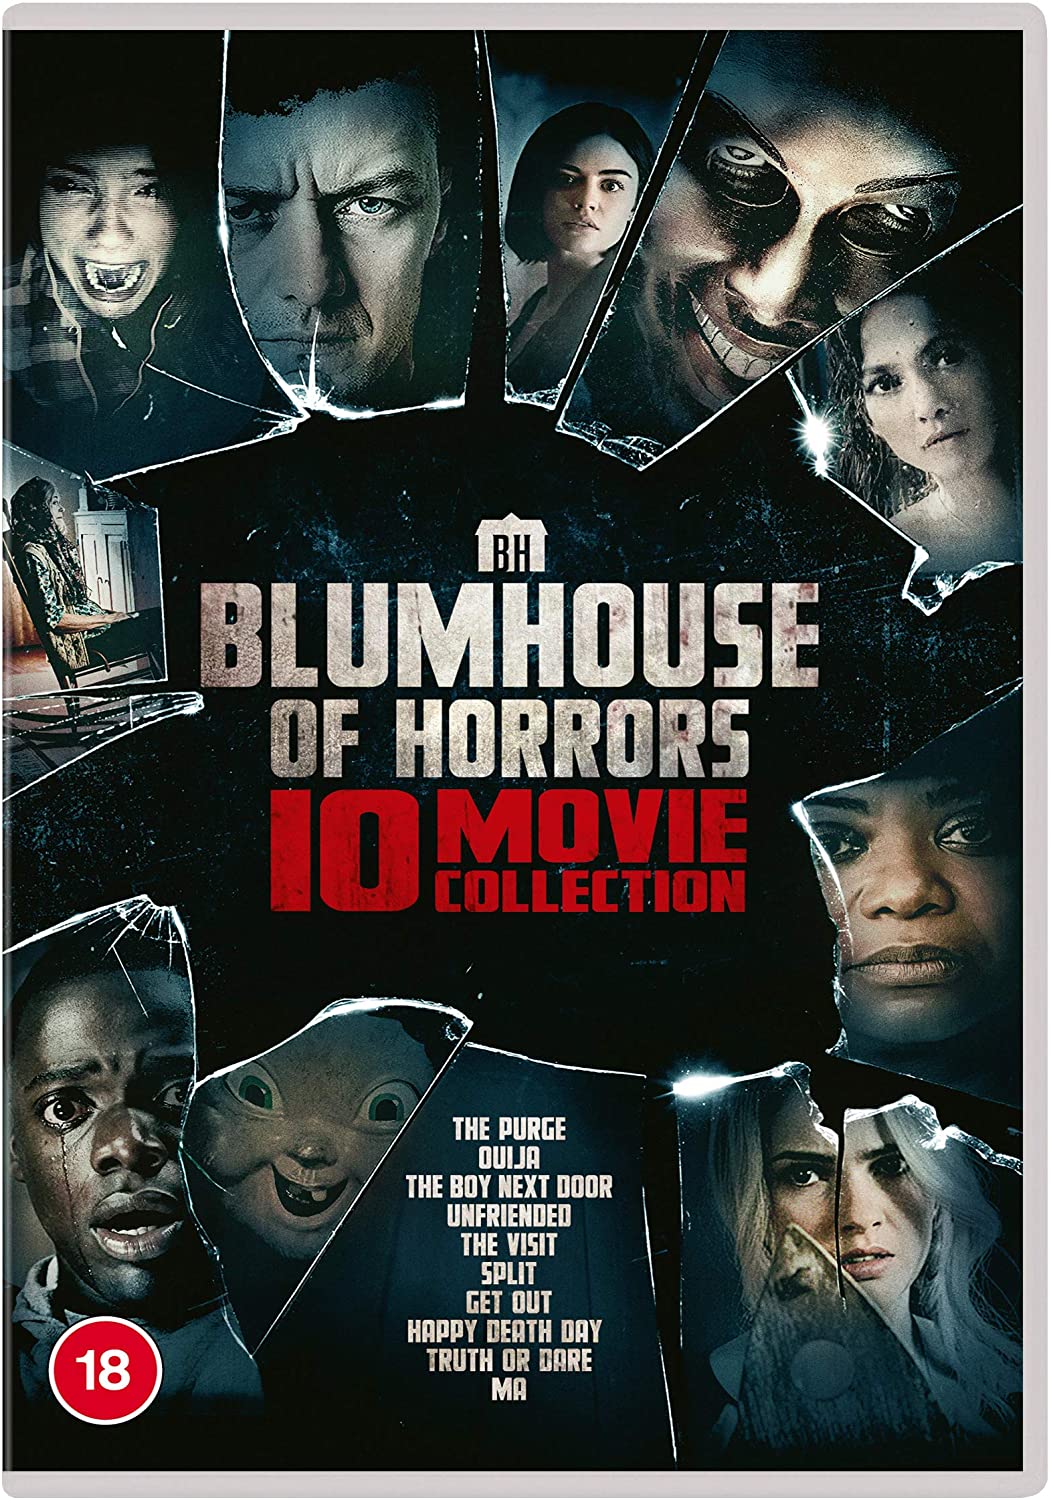 Blumhouse of Horrors 10-movie Collection (DVD)